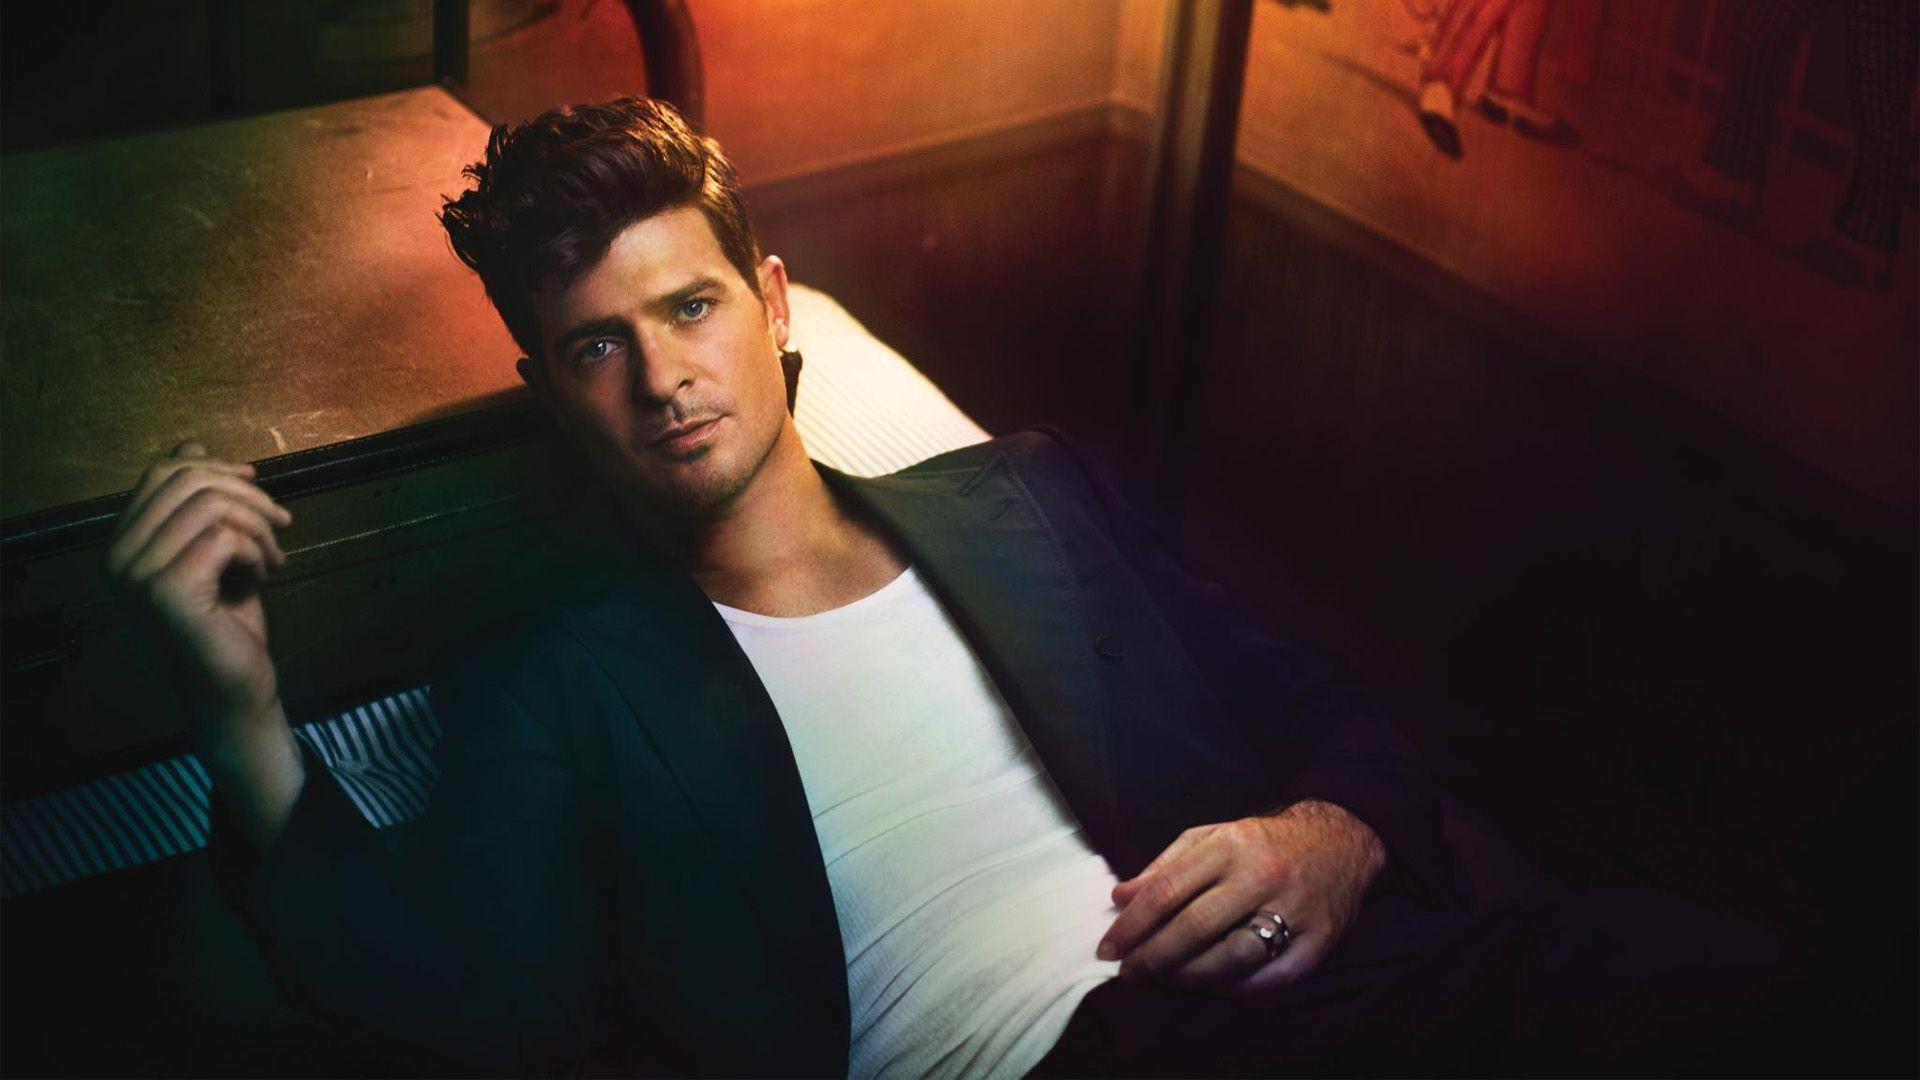 Robin Thicke Wallpaper, 37 Robin Thicke Image and Wallpaper